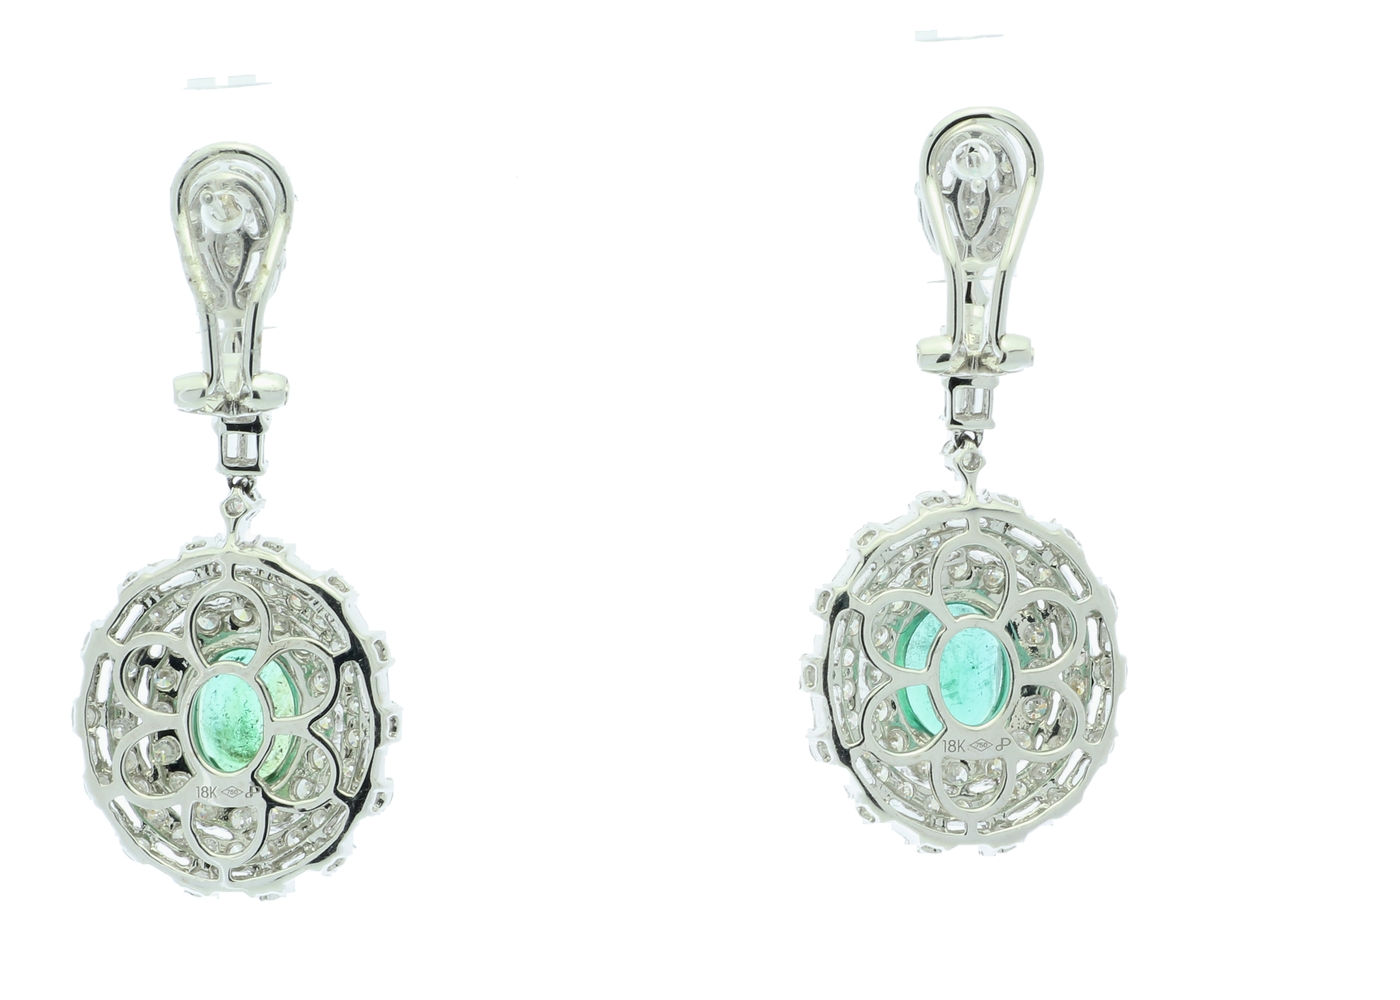 18ct White Gold Diamond And Emerald Drop Earrings (E2.61) 3.74 Carats - Image 2 of 5